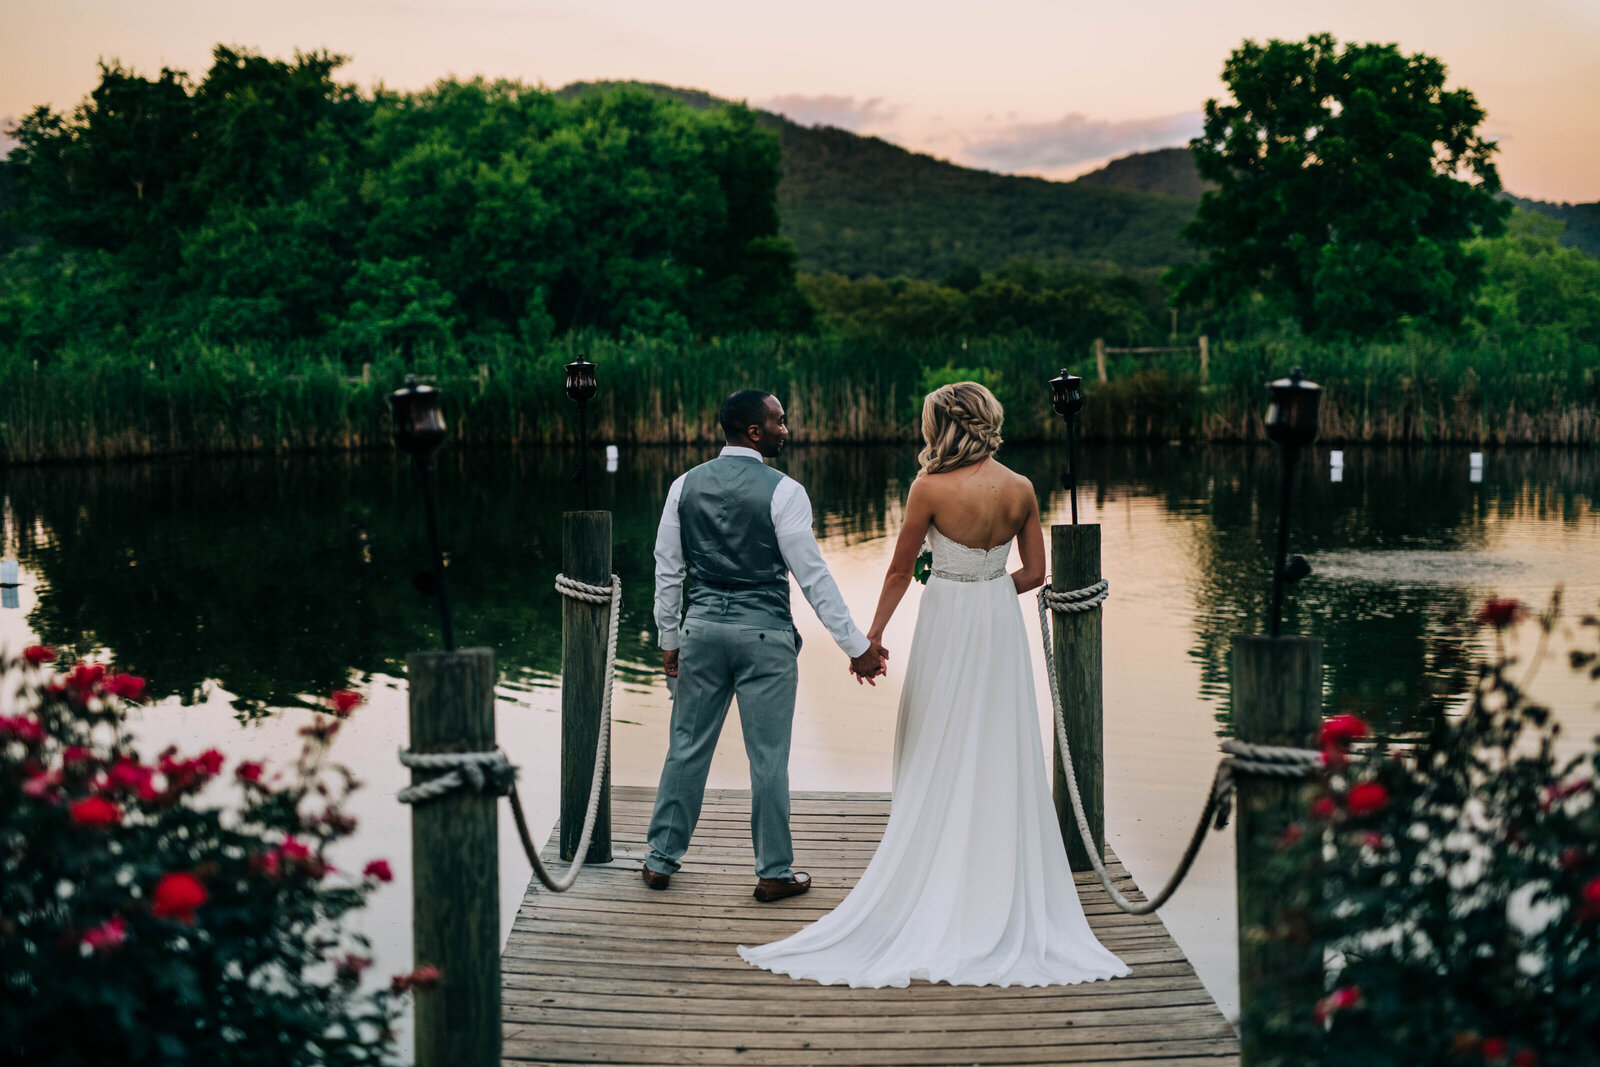 Lake wedding photo in Knoxville with bride and groom holding hands